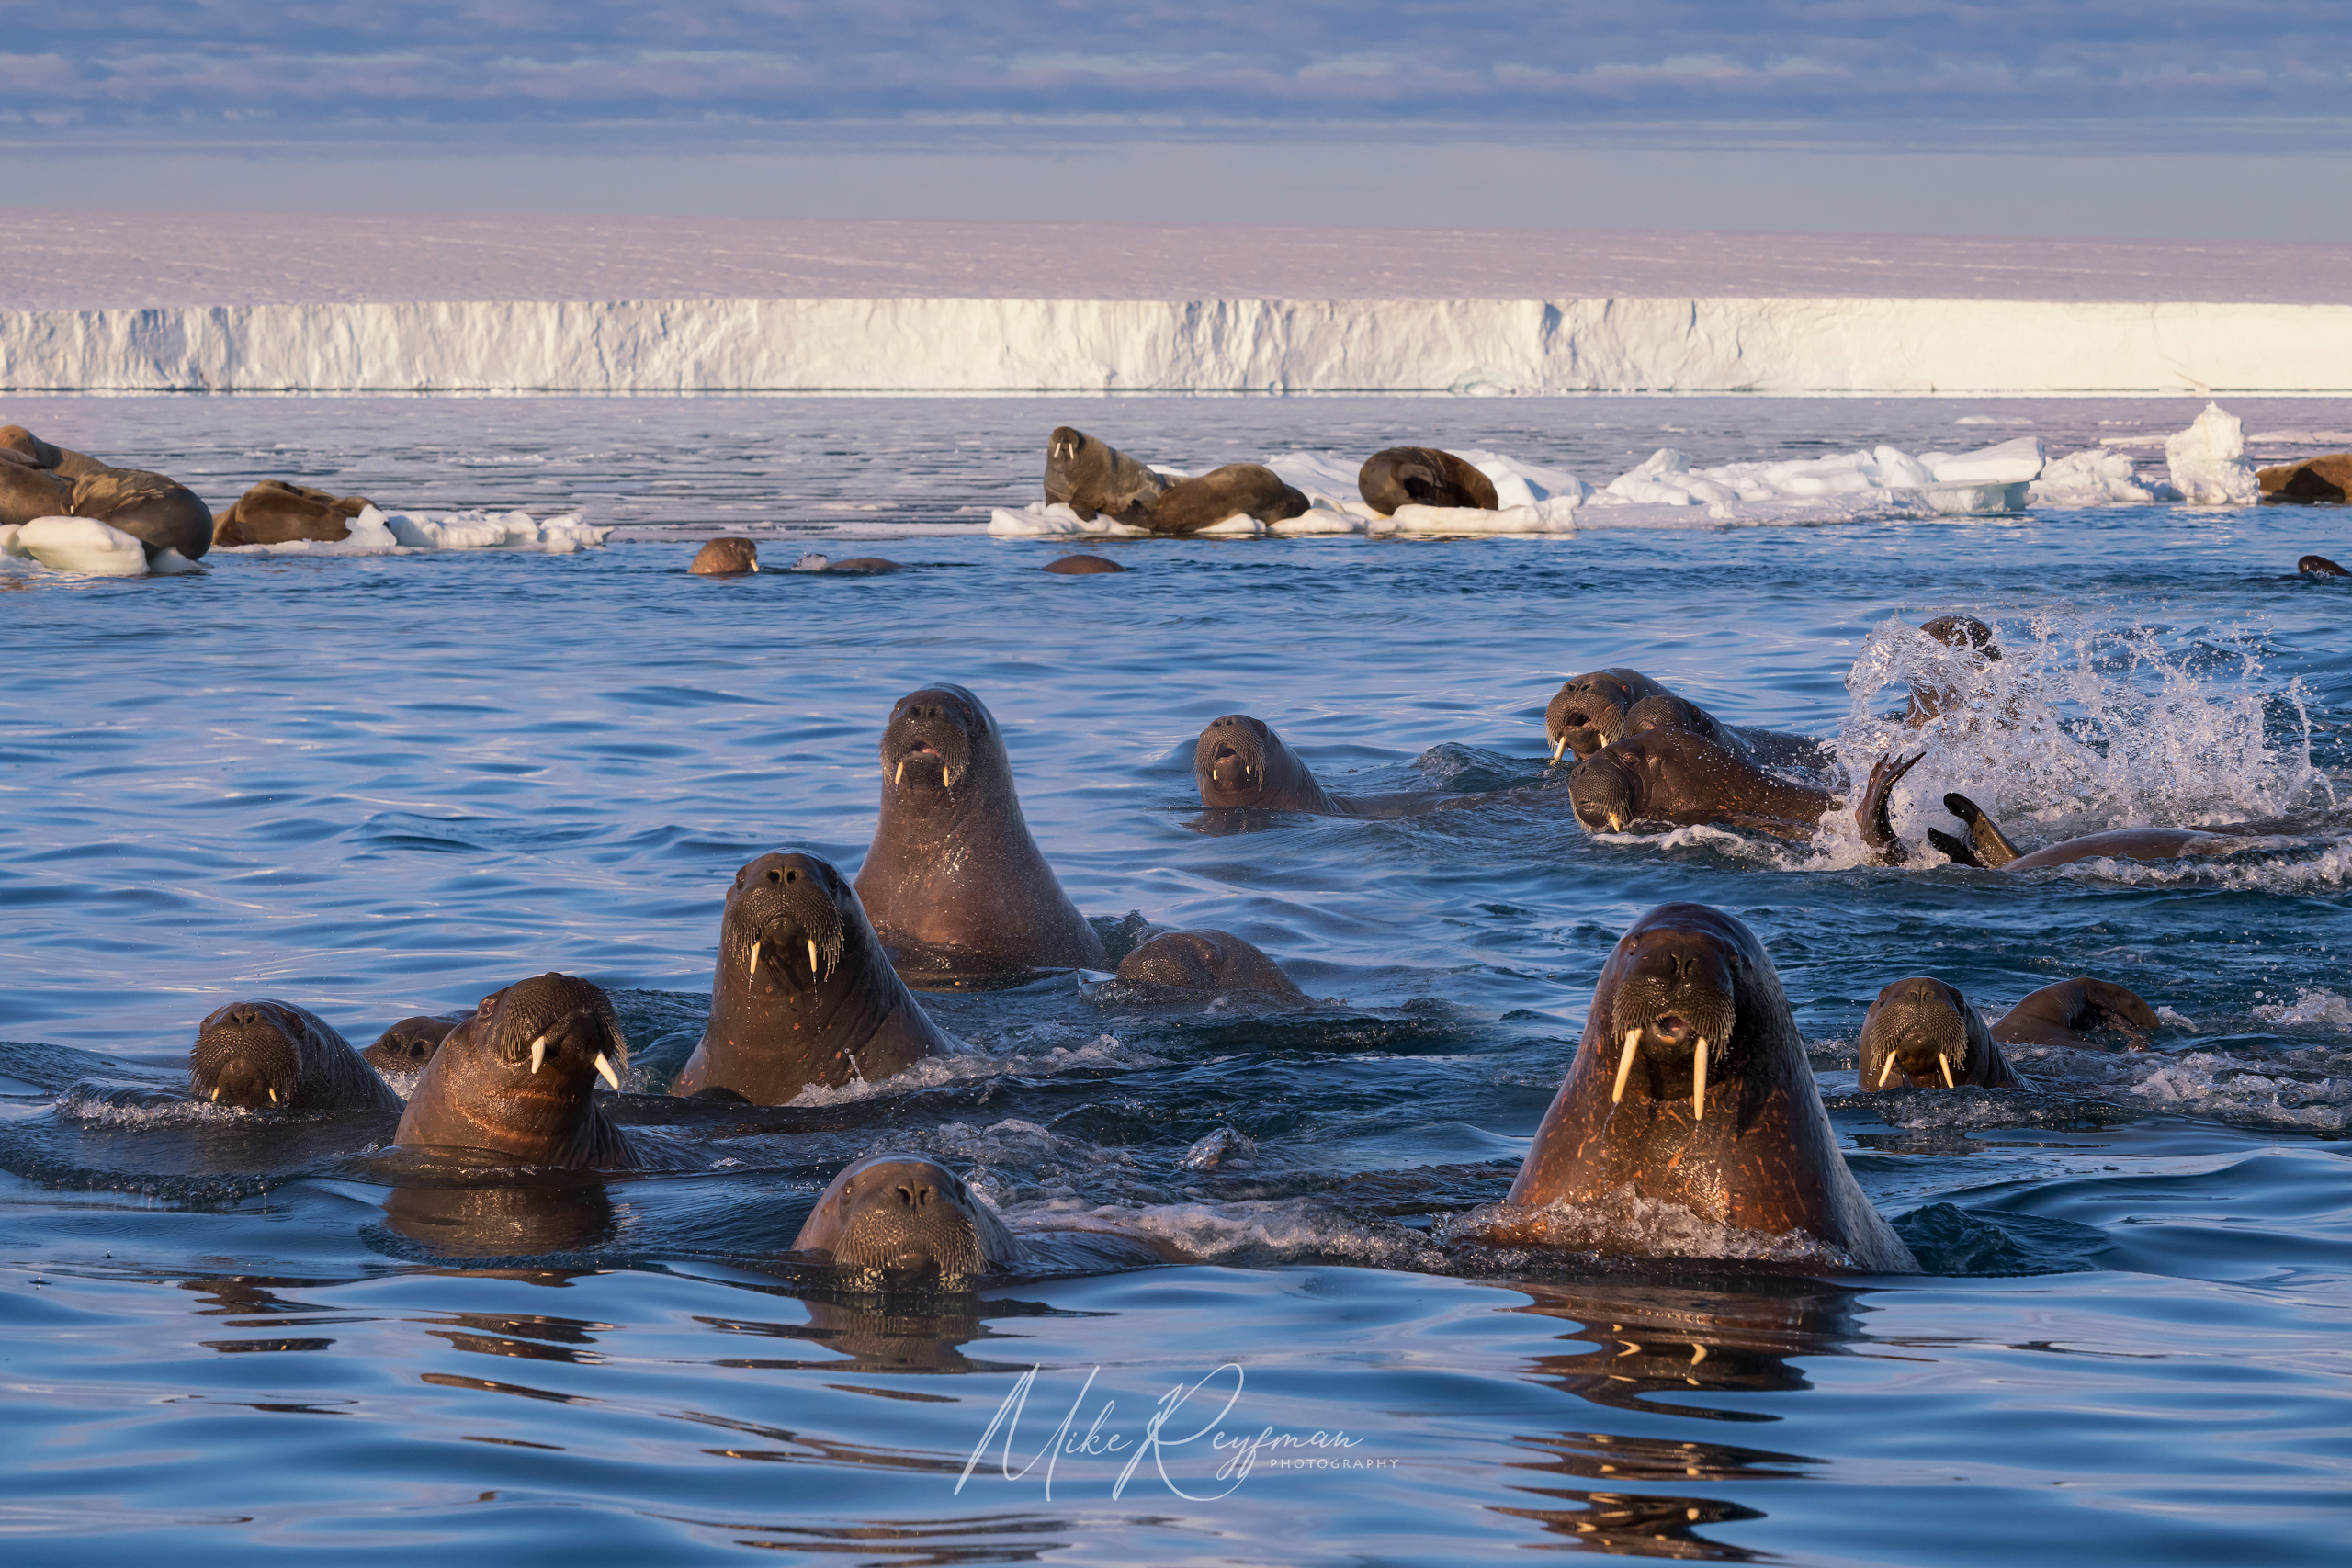 The Gang of Walruses WL-SV-005-Z8A6854 - The Walruses and Seals of Svalbard (Spitsbergen) - Mike Reyfman Photography